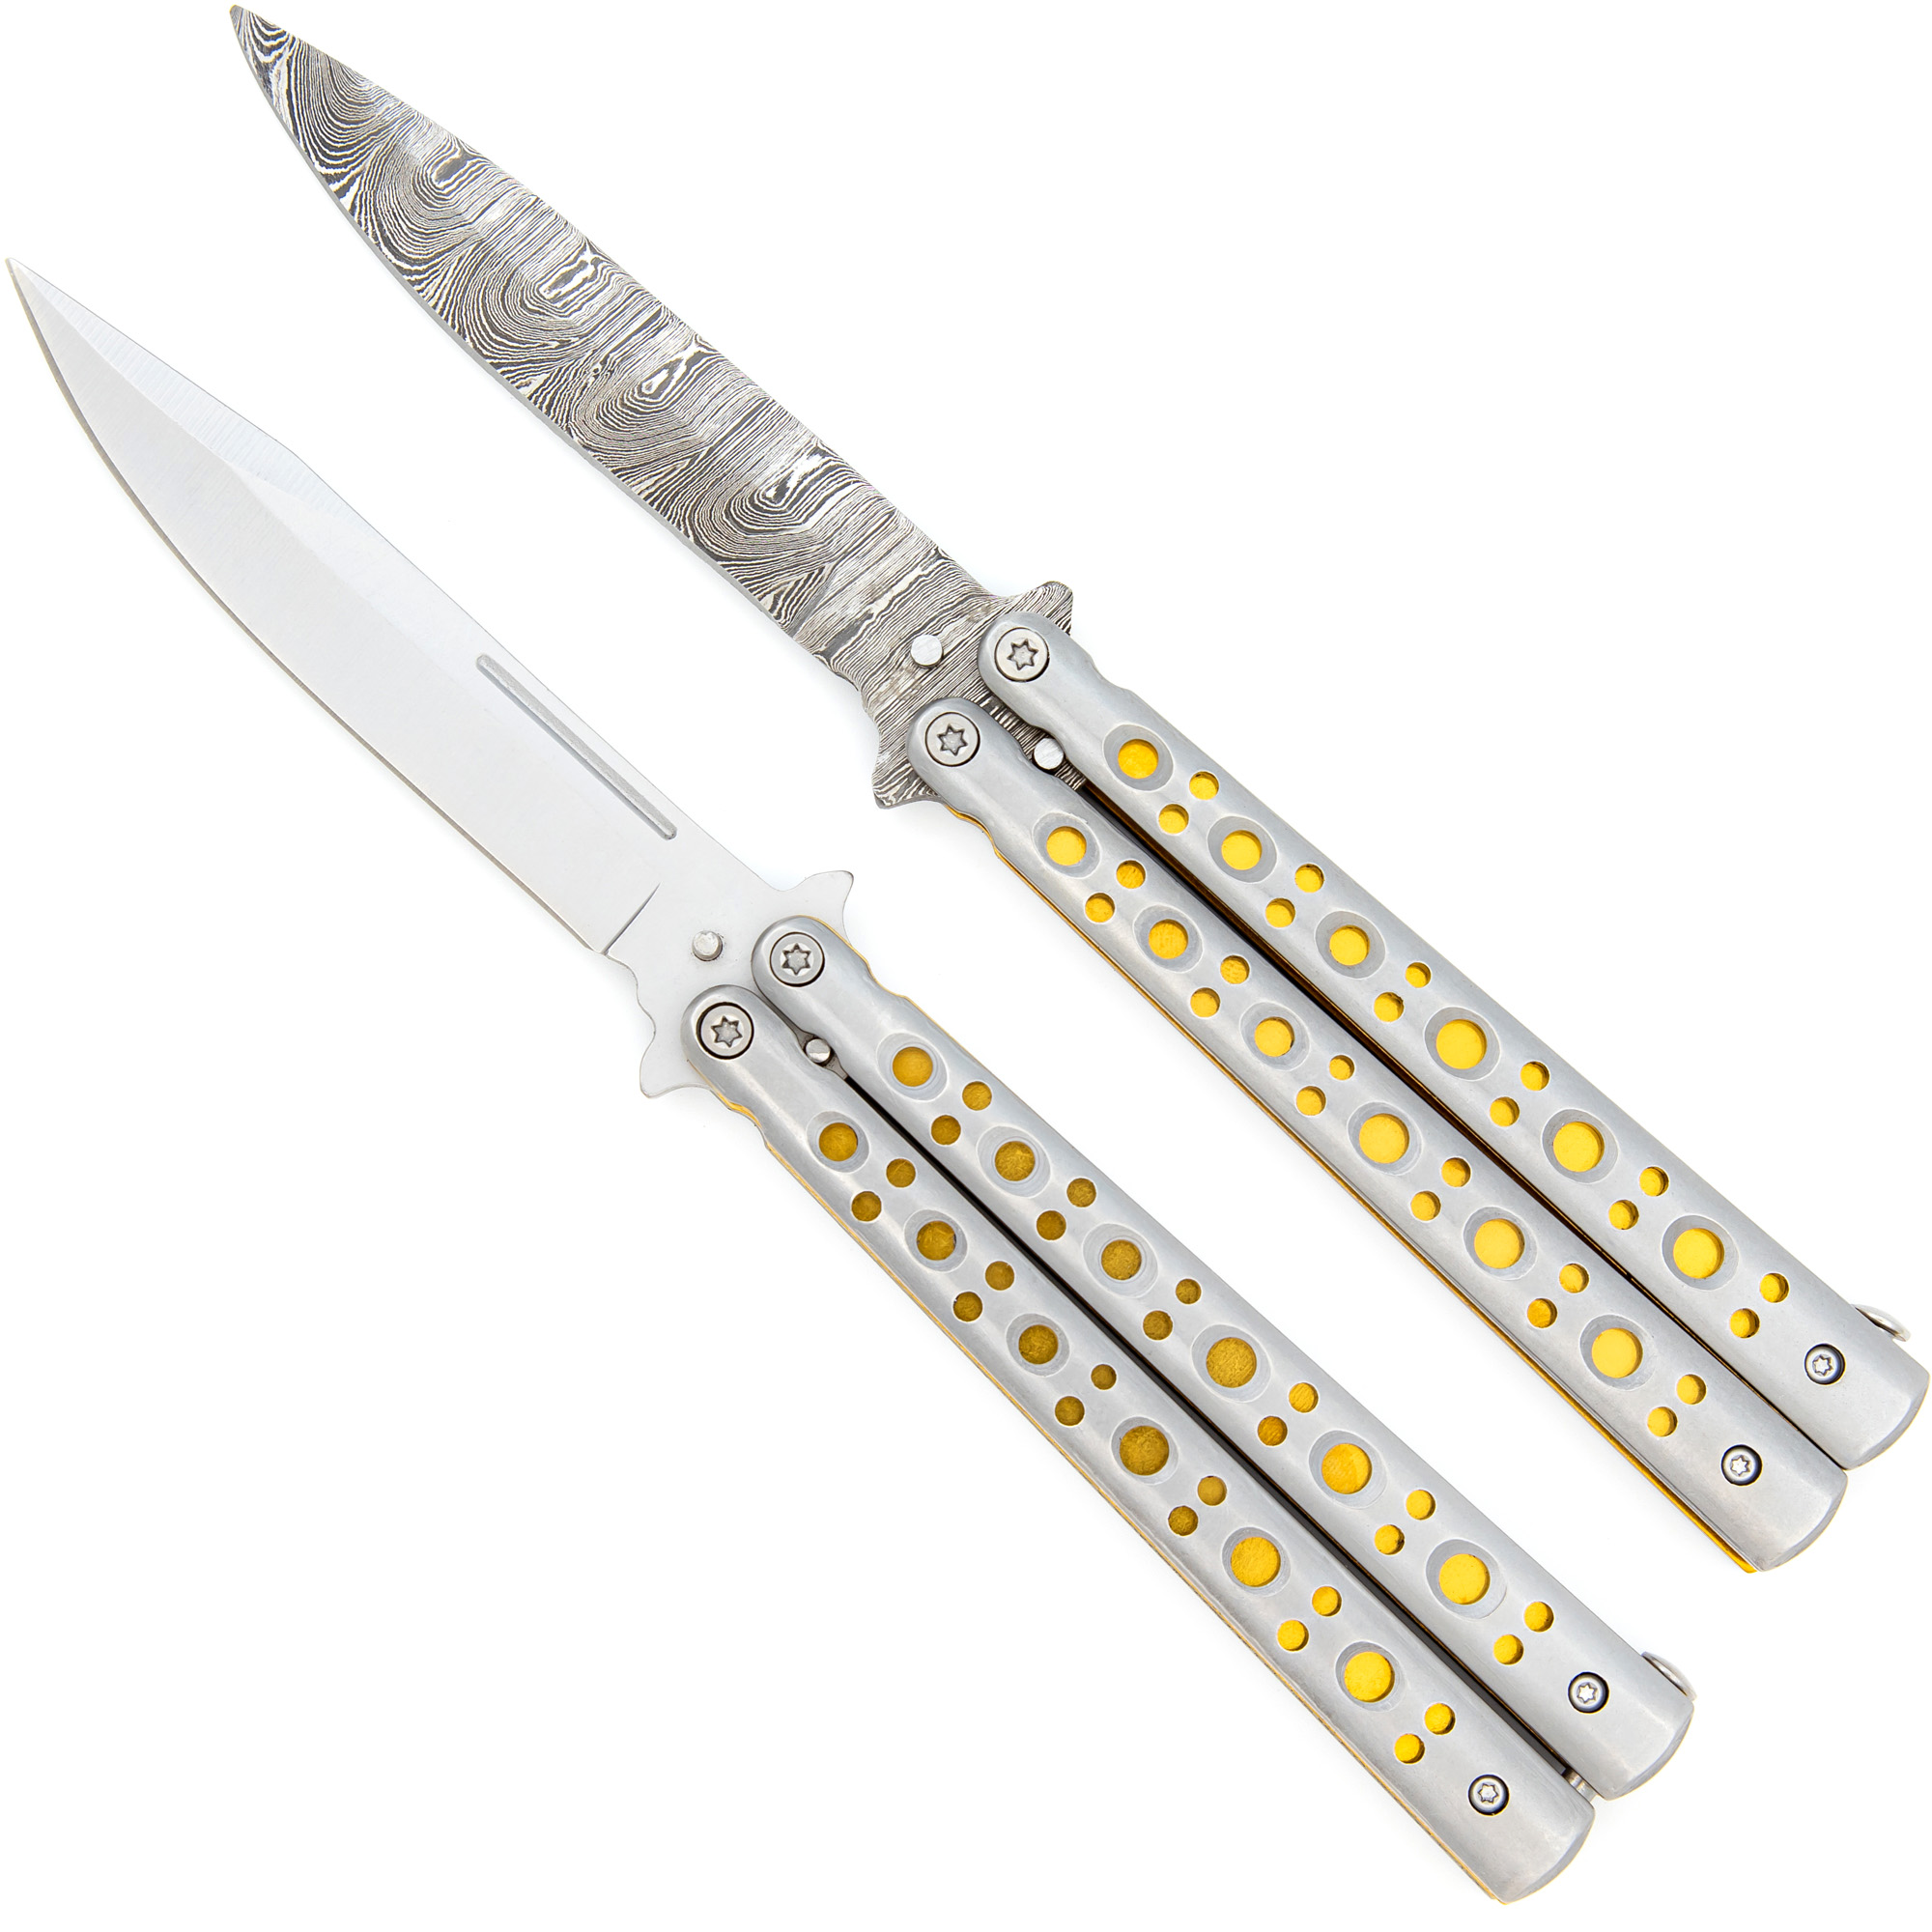 GOLD Panning Clip Point Balisong Butterfly Knife Flipper